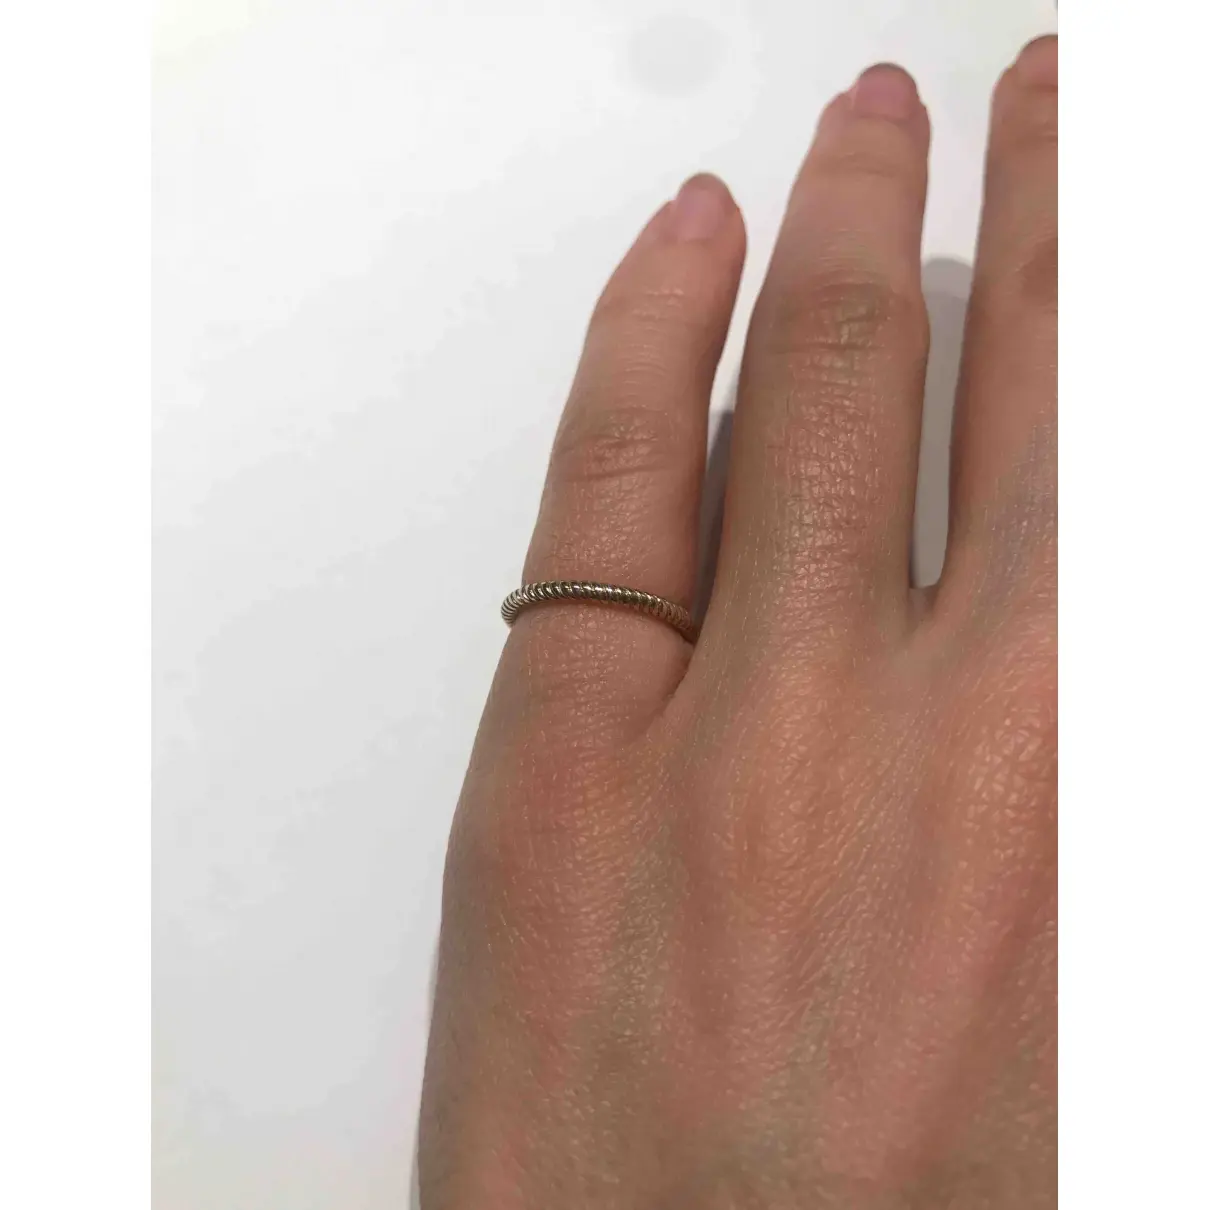 Buy Aristocrazy Silver ring online